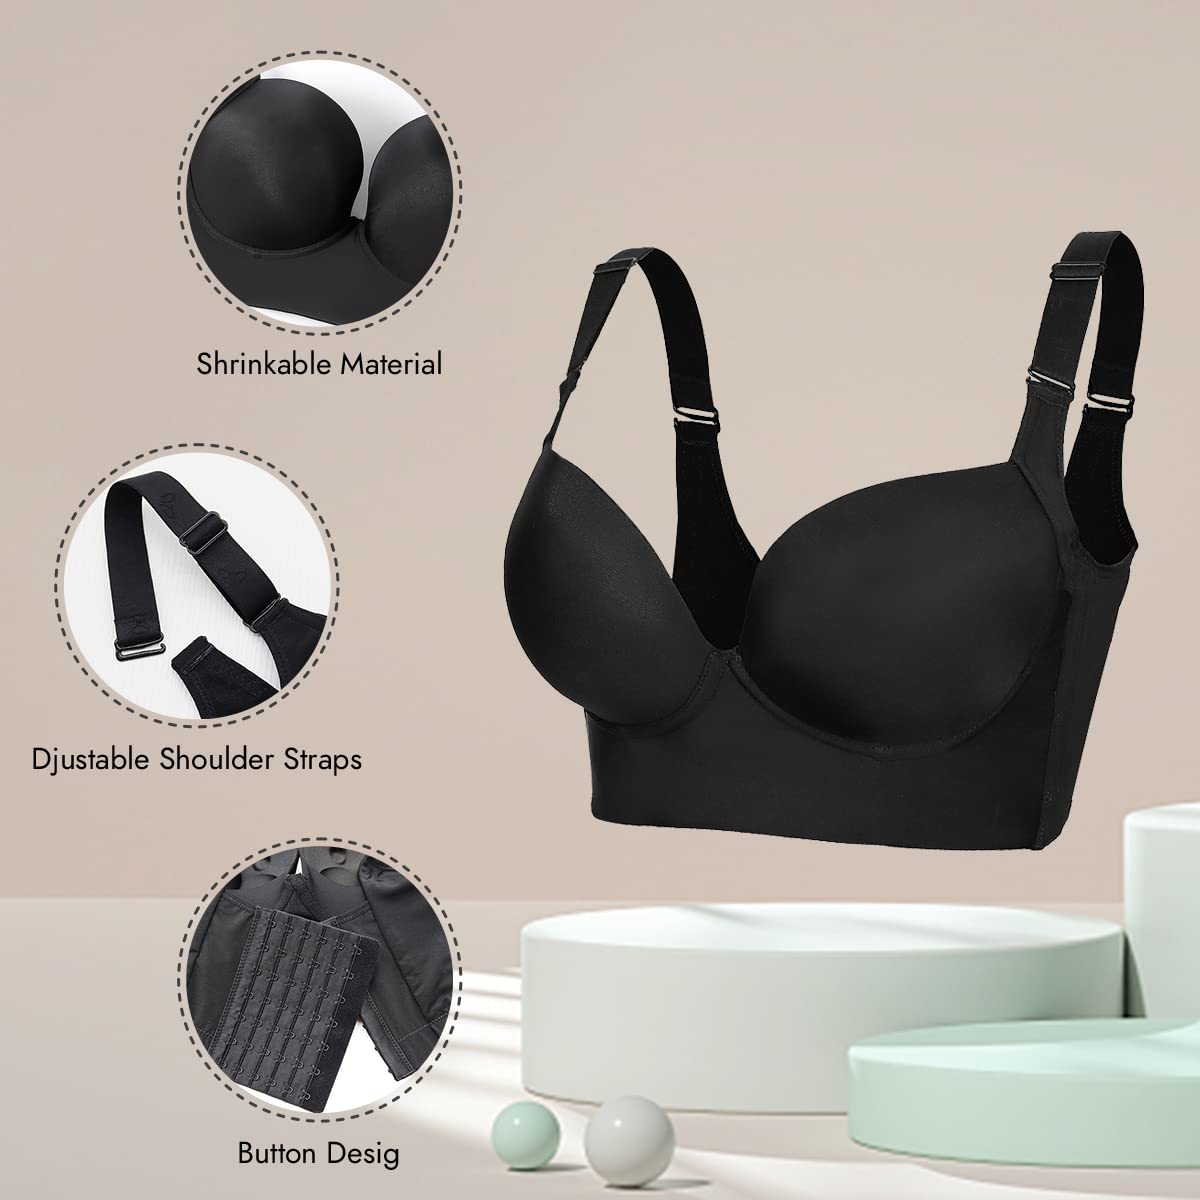 Woobilly® Push-Up Back Smoothing Bra (Buy 1 Get 1 Free)(2 PACK)